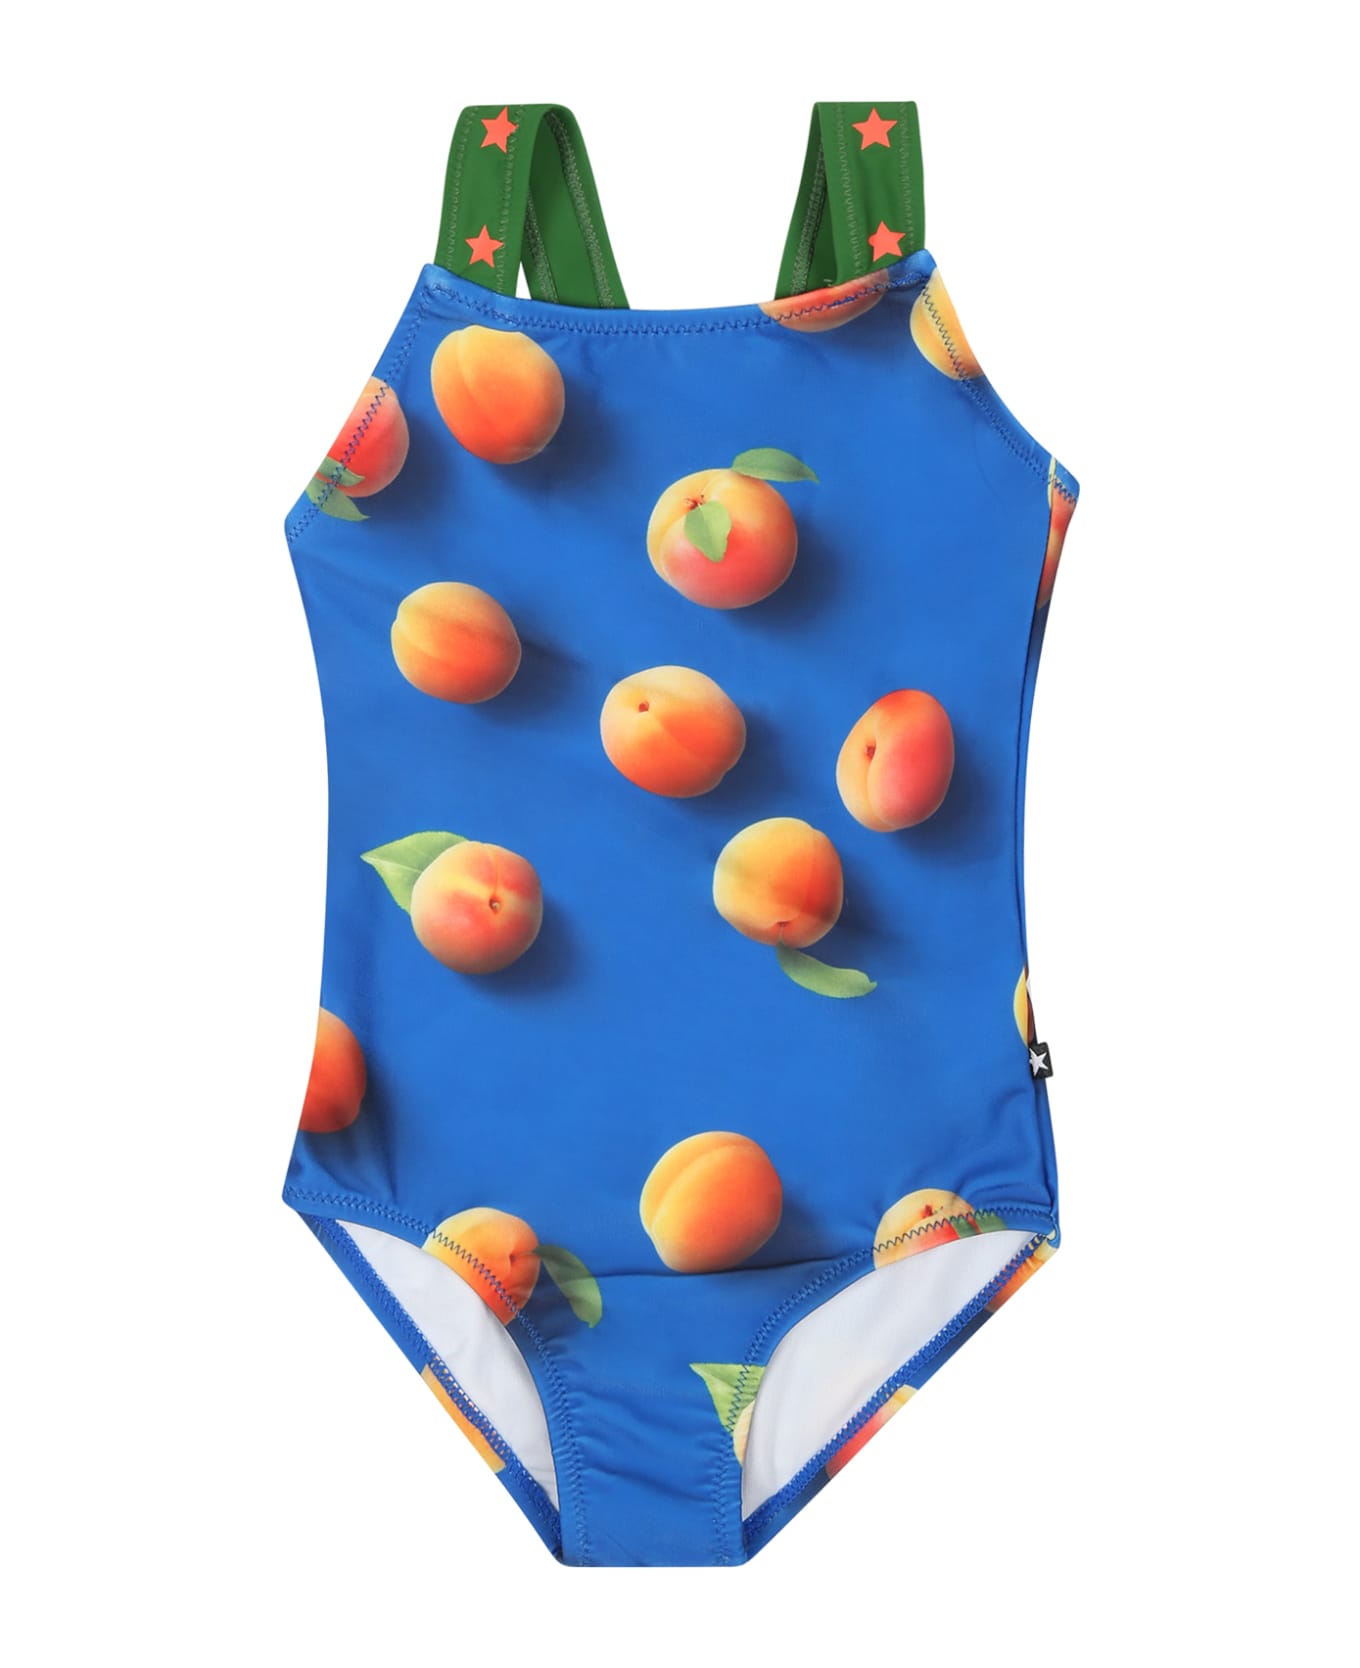 Molo Blue Swimsuit For Baby Girl With Apricot Print - Blue 水着